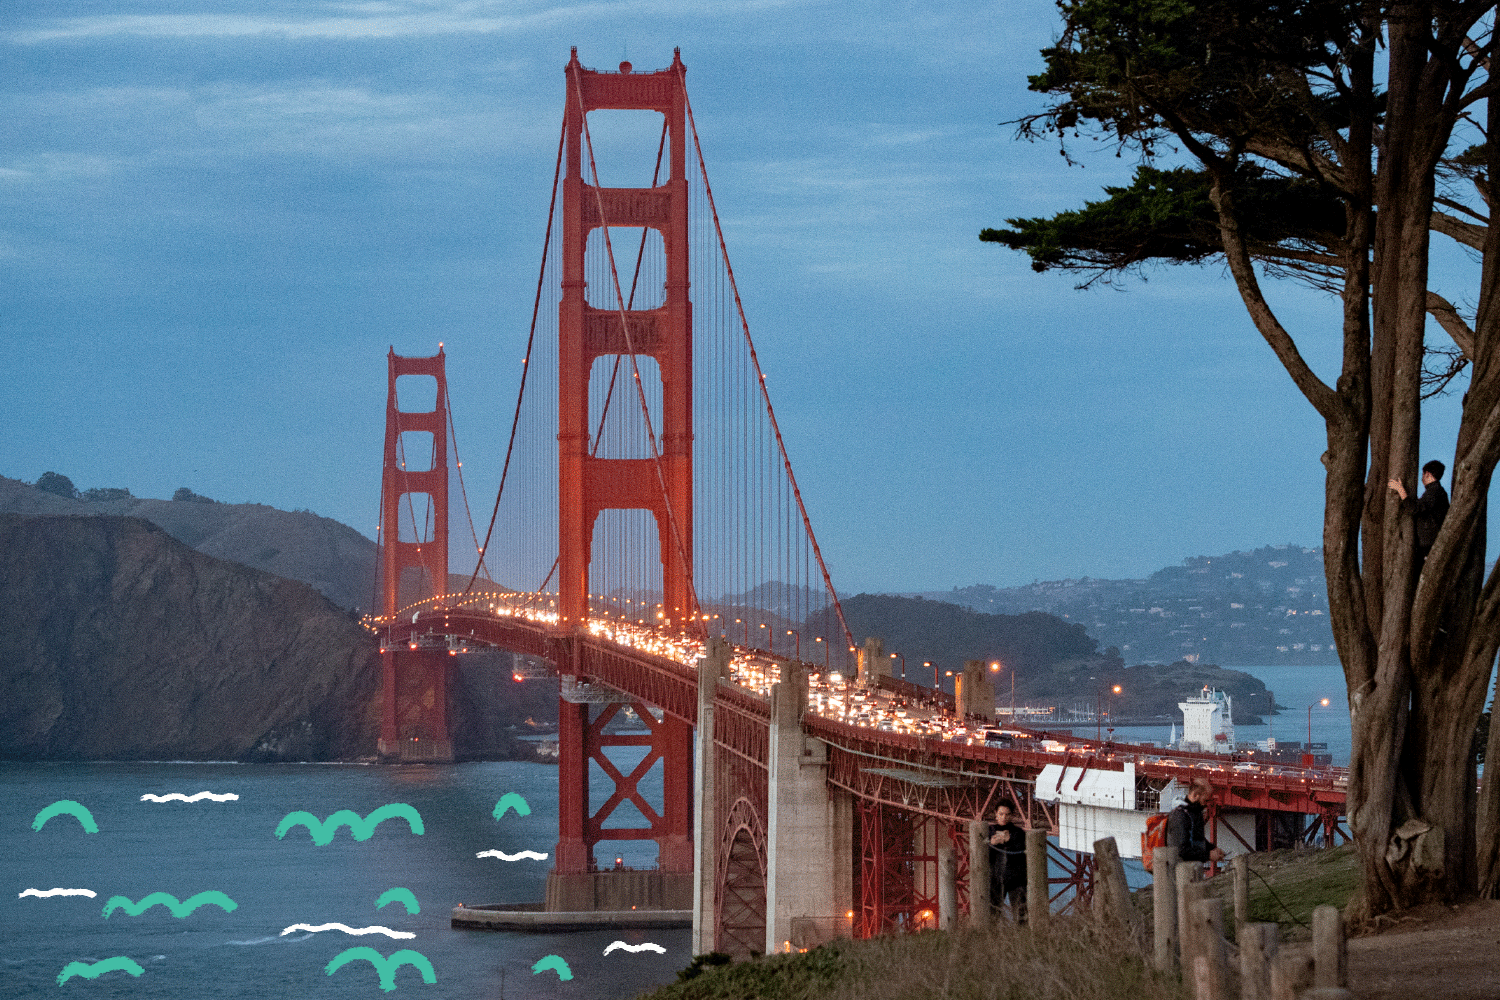 A GIF of squiggles dancing in the water next to the Golden Gate Bridge, loaded with cars with headlights on at dusk.